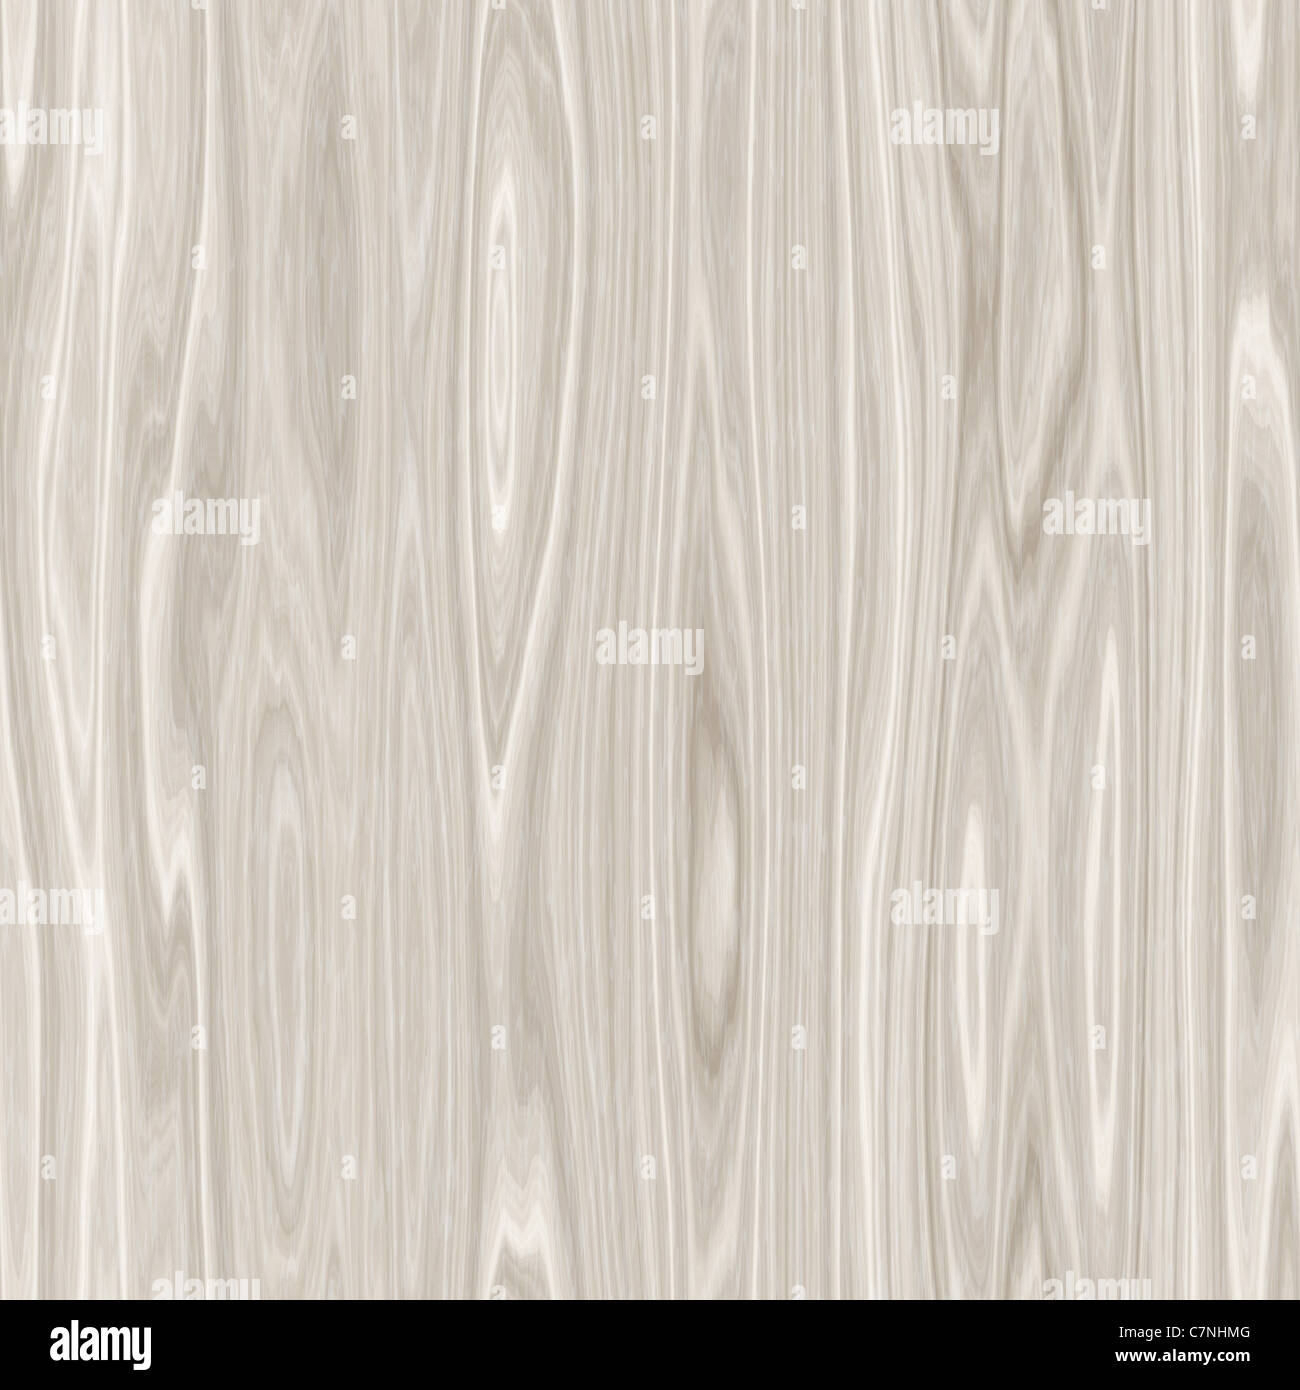 A more modern style of lighter colored wood grain texture that tiles seamlessly as a pattern. Stock Photo